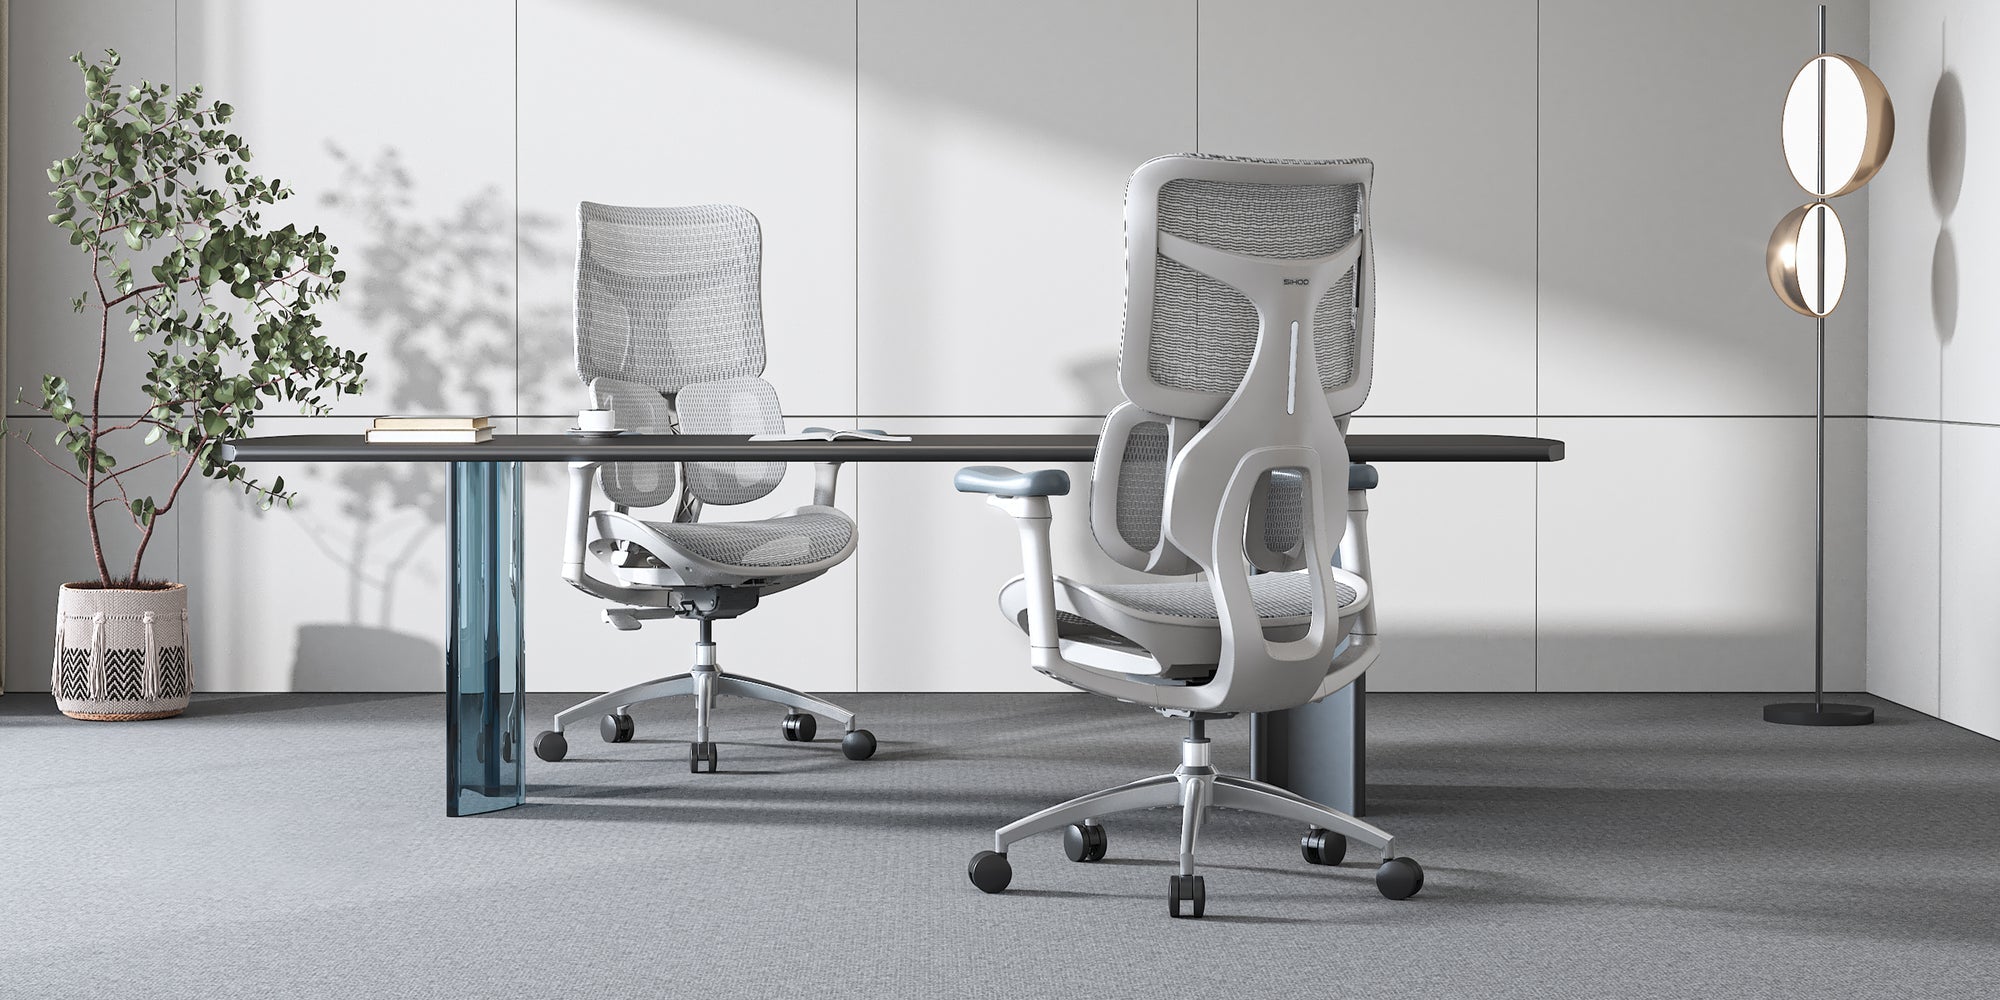 Understanding the Components of Office Chairs Most Prone to Breakage